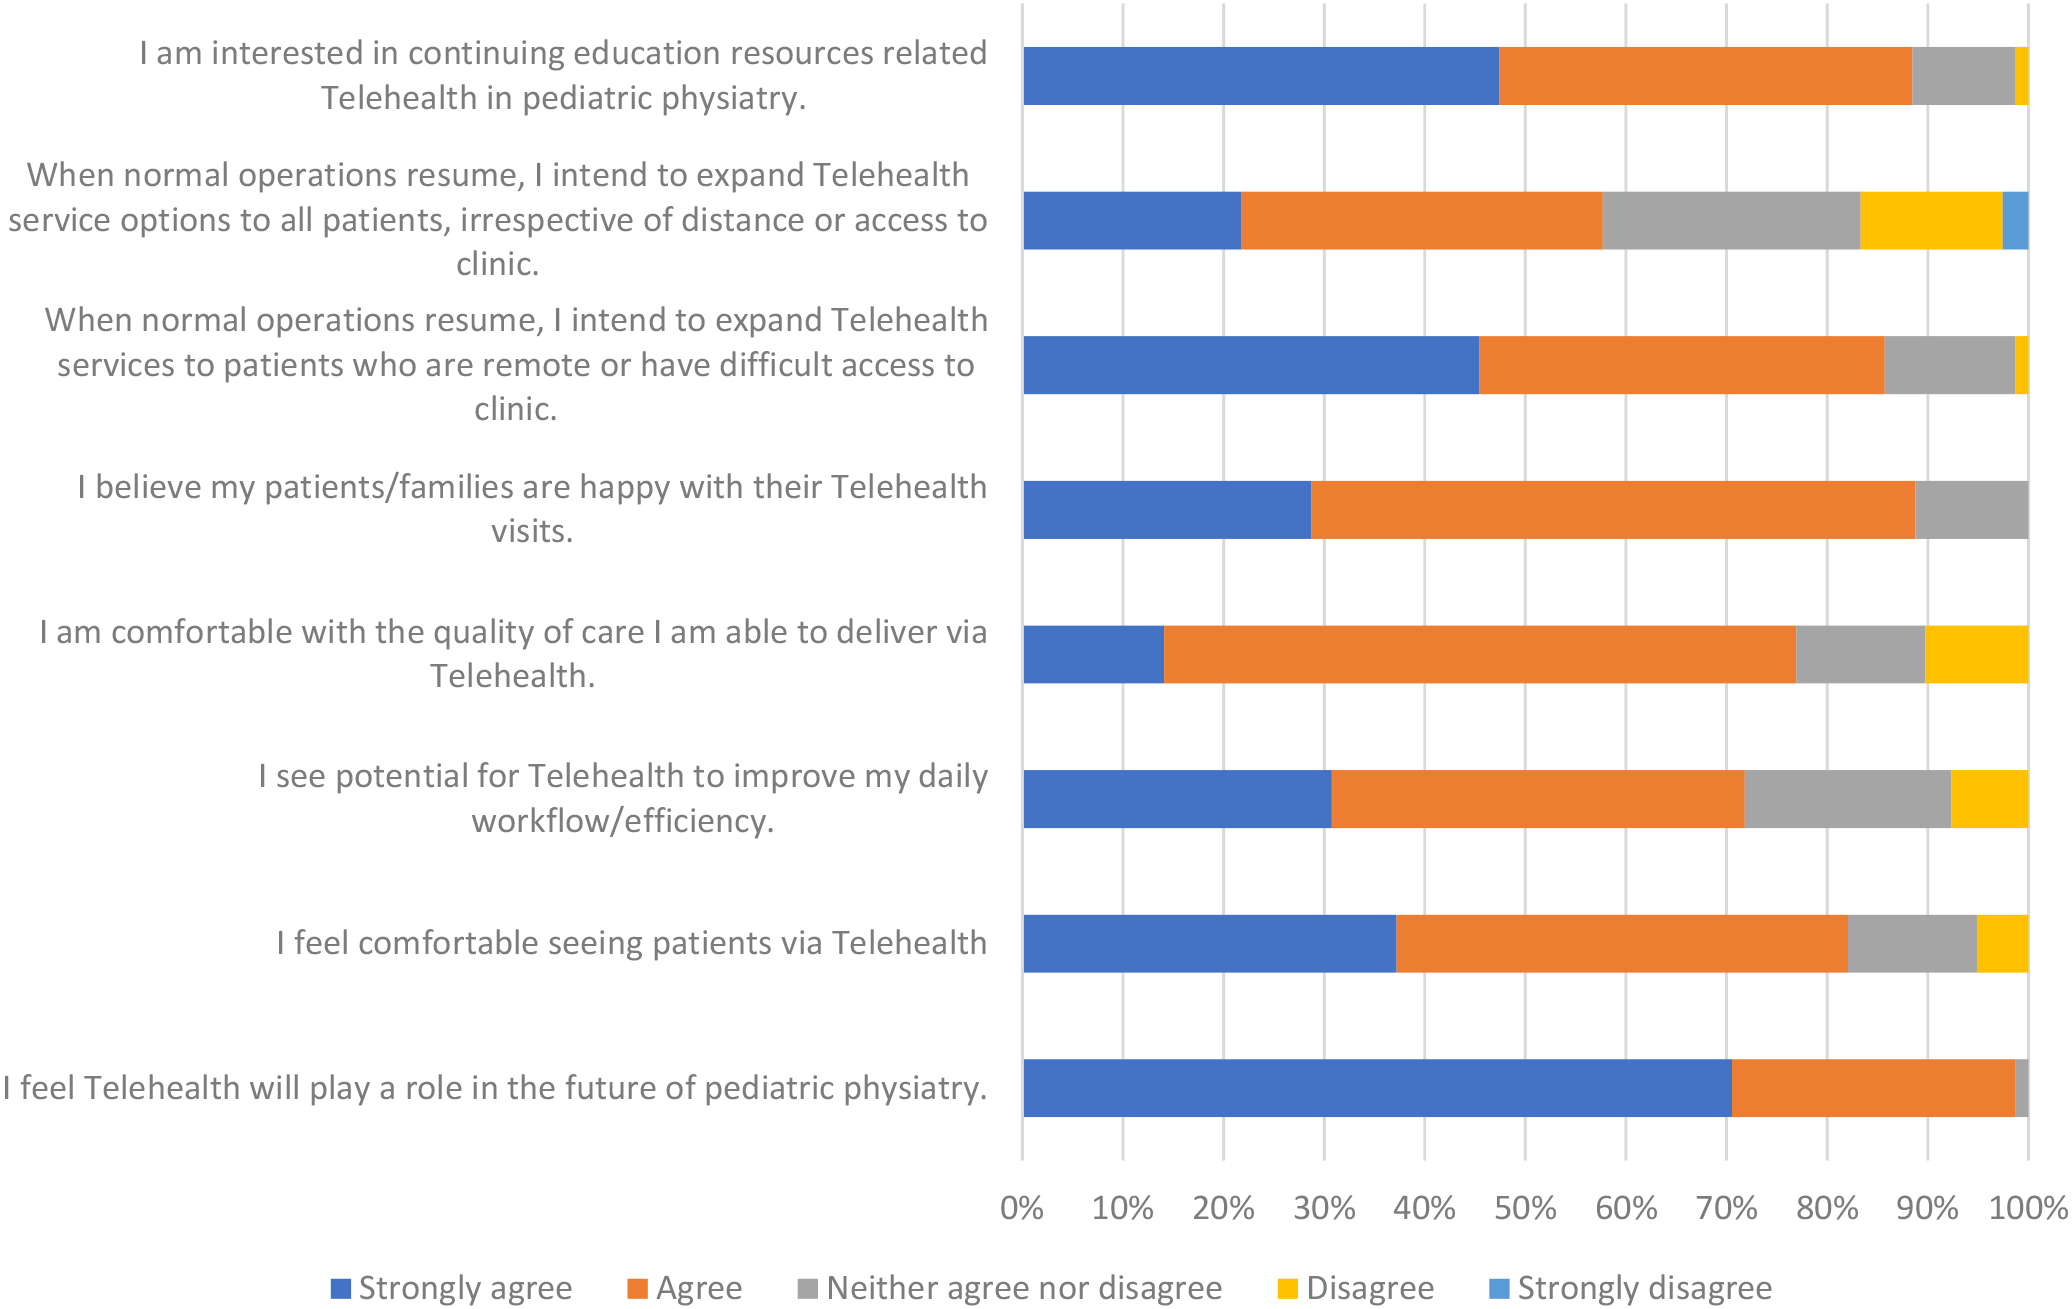 Telehealth experiences and intentions. This figure depicts the responses regarding telehealth experiences and opinions.